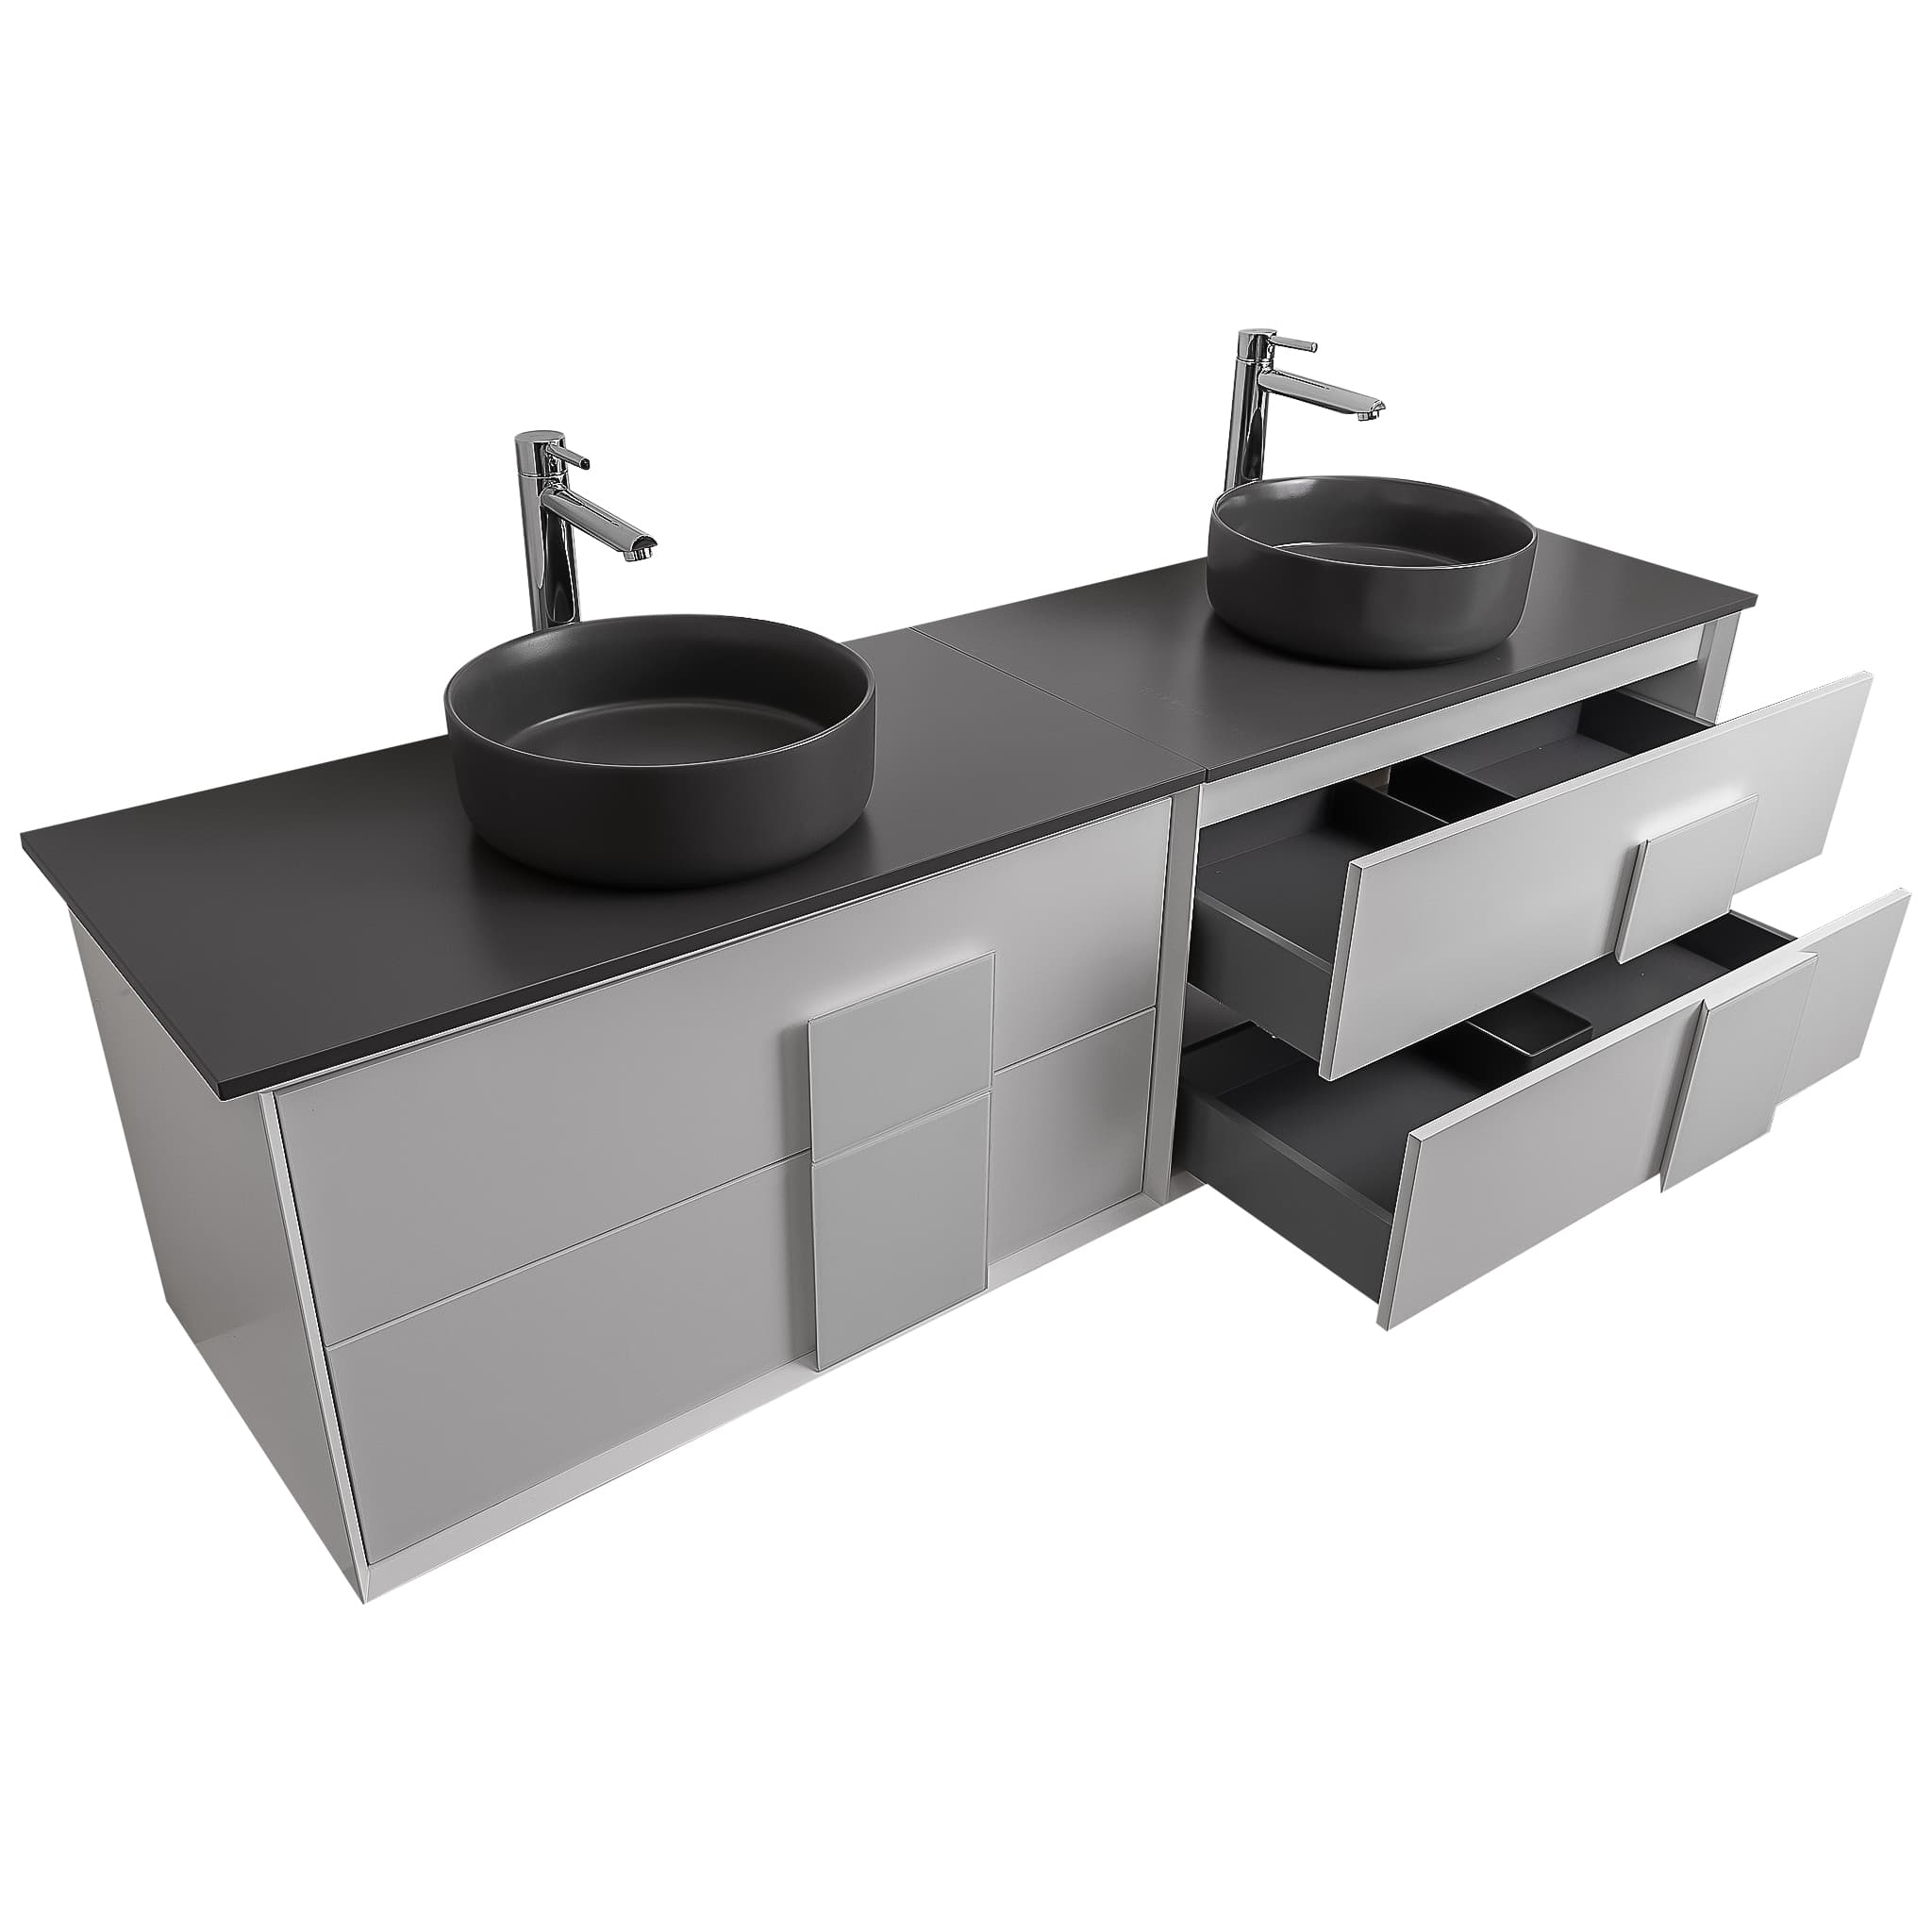 Piazza 63 Matte White With White Handle Cabinet, Ares Grey Ceniza Top and Two Ares Grey Ceniza Ceramic Basin, Wall Mounted Modern Vanity Set